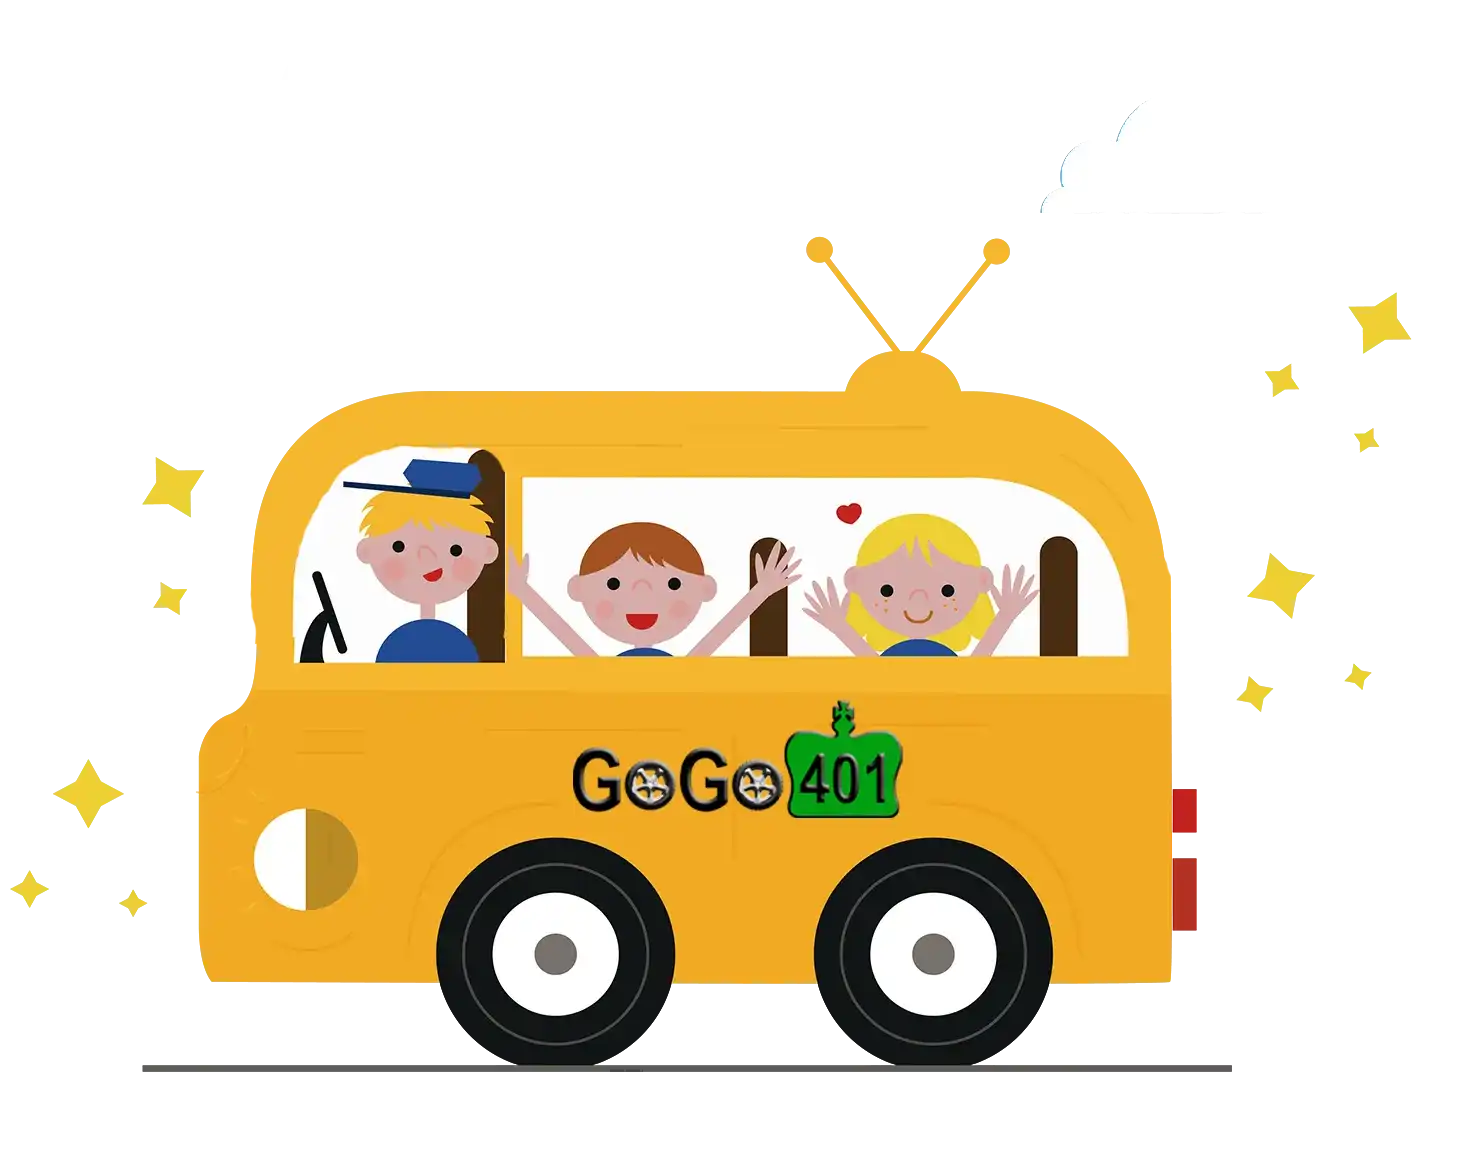 Safe and Reliable journey for your love one from GO GO 401